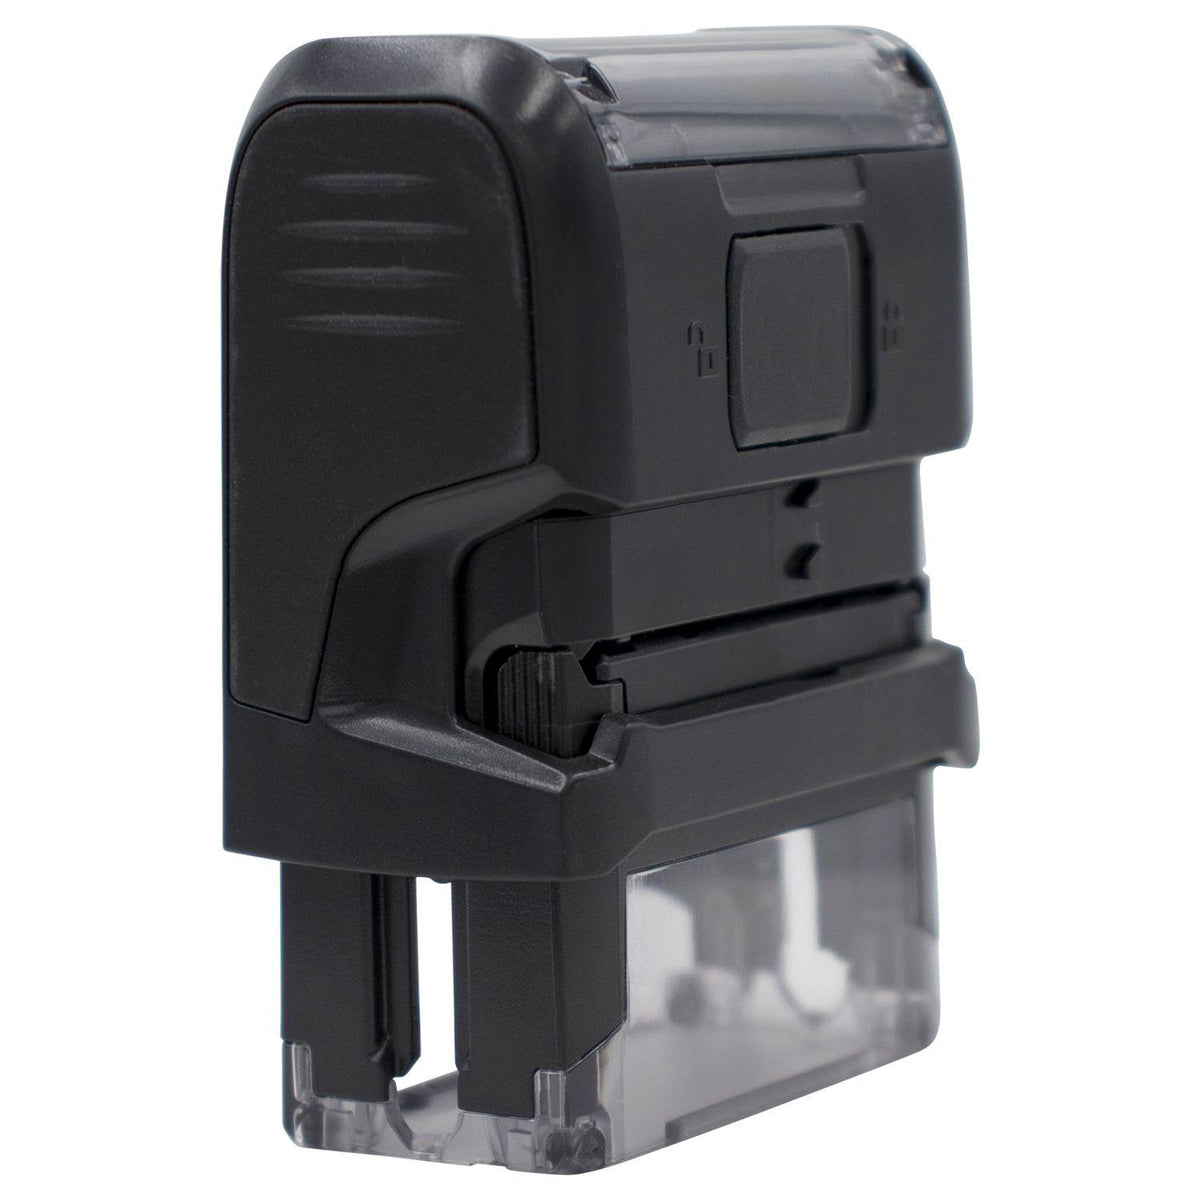 Large Self-Inking Barcode Confidential Stamp Back View